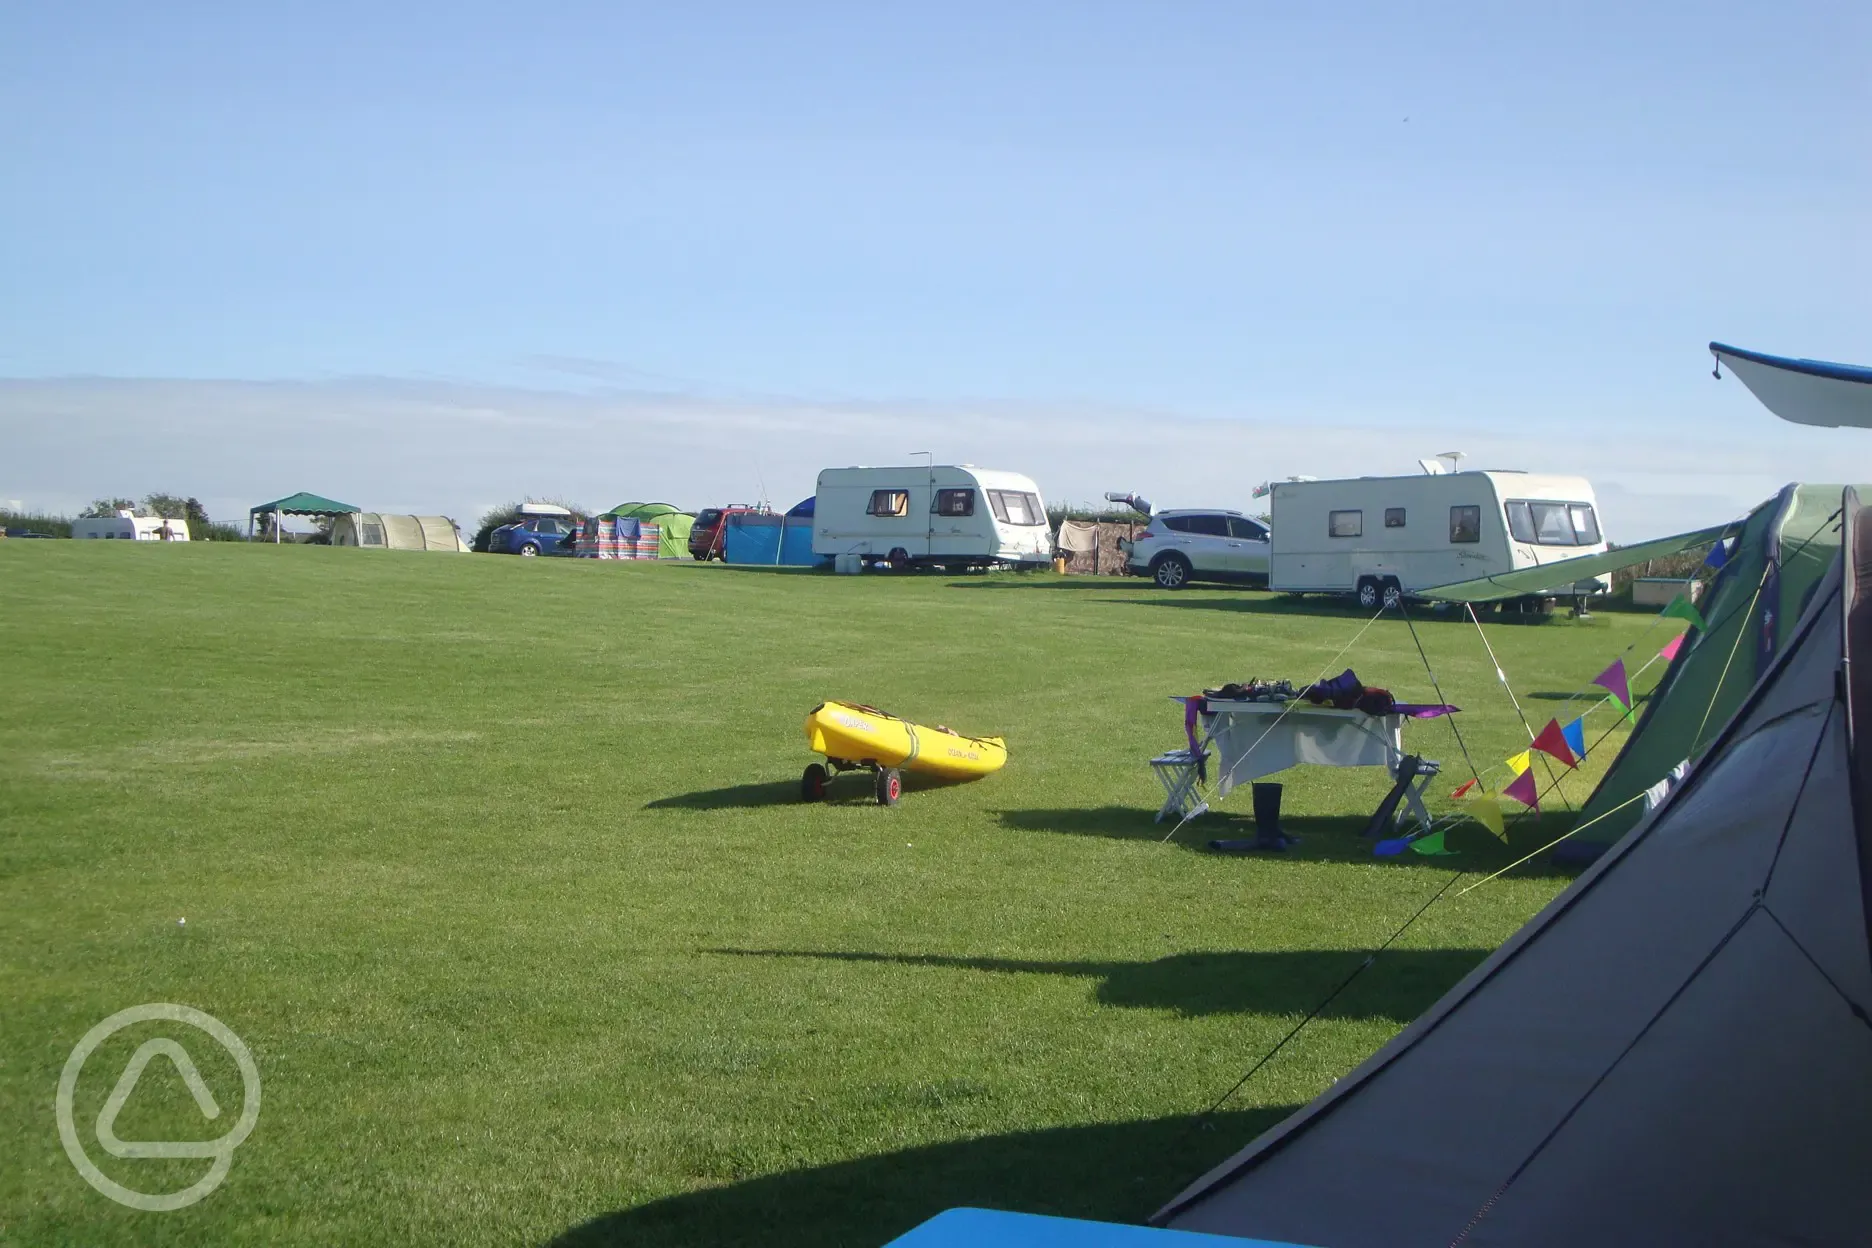  Grass pitches